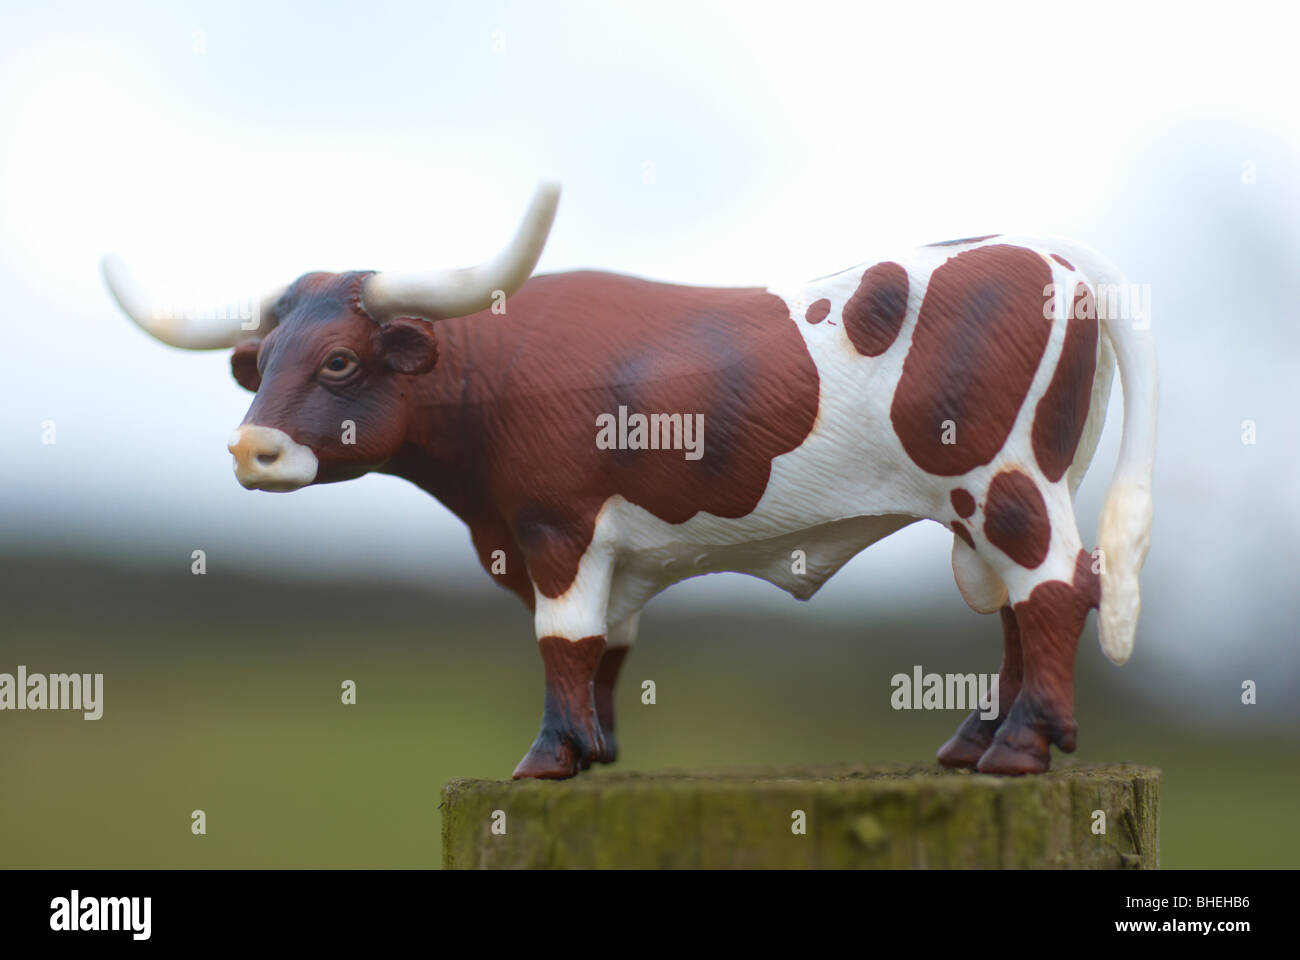 Texas longhorn plastic model cow photographed outside in a field. Stock Photo